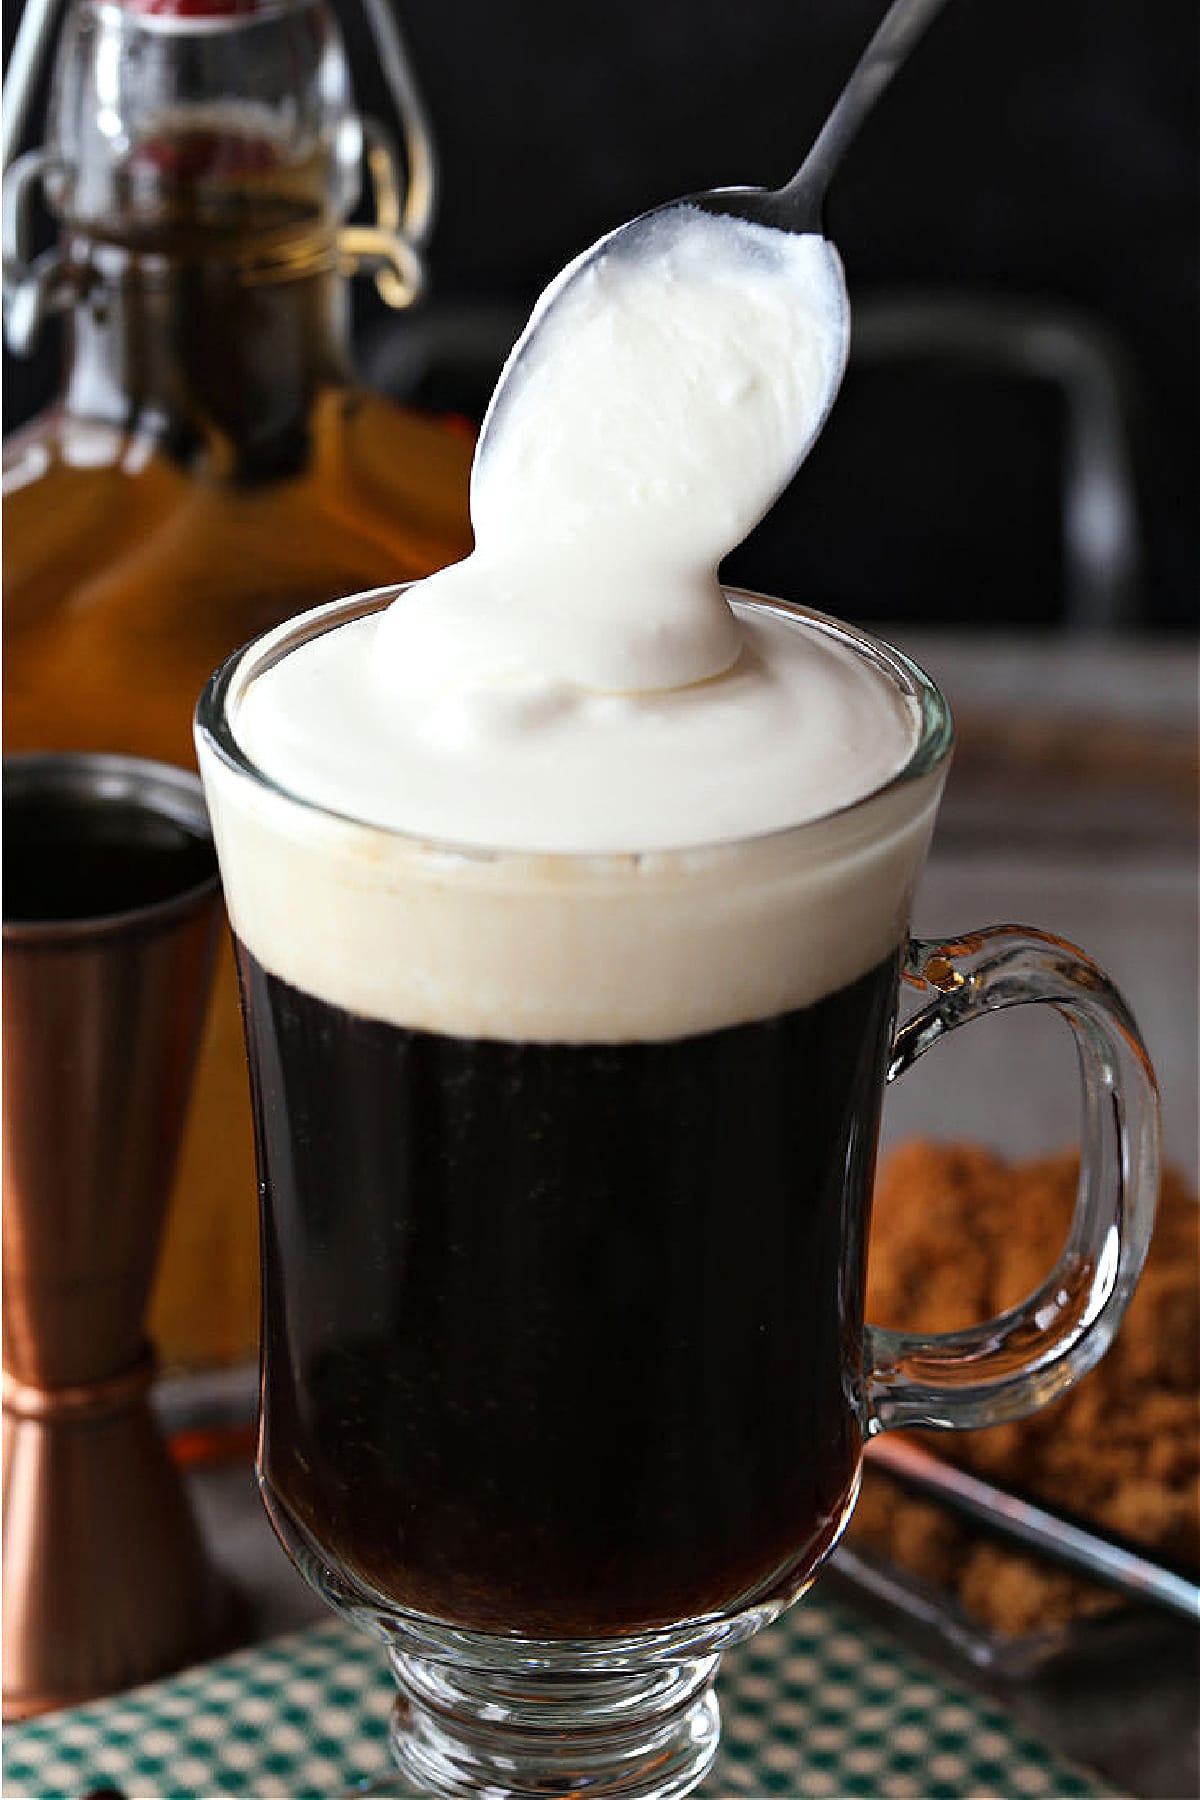 whipped cream being spooned on top of Irish coffee